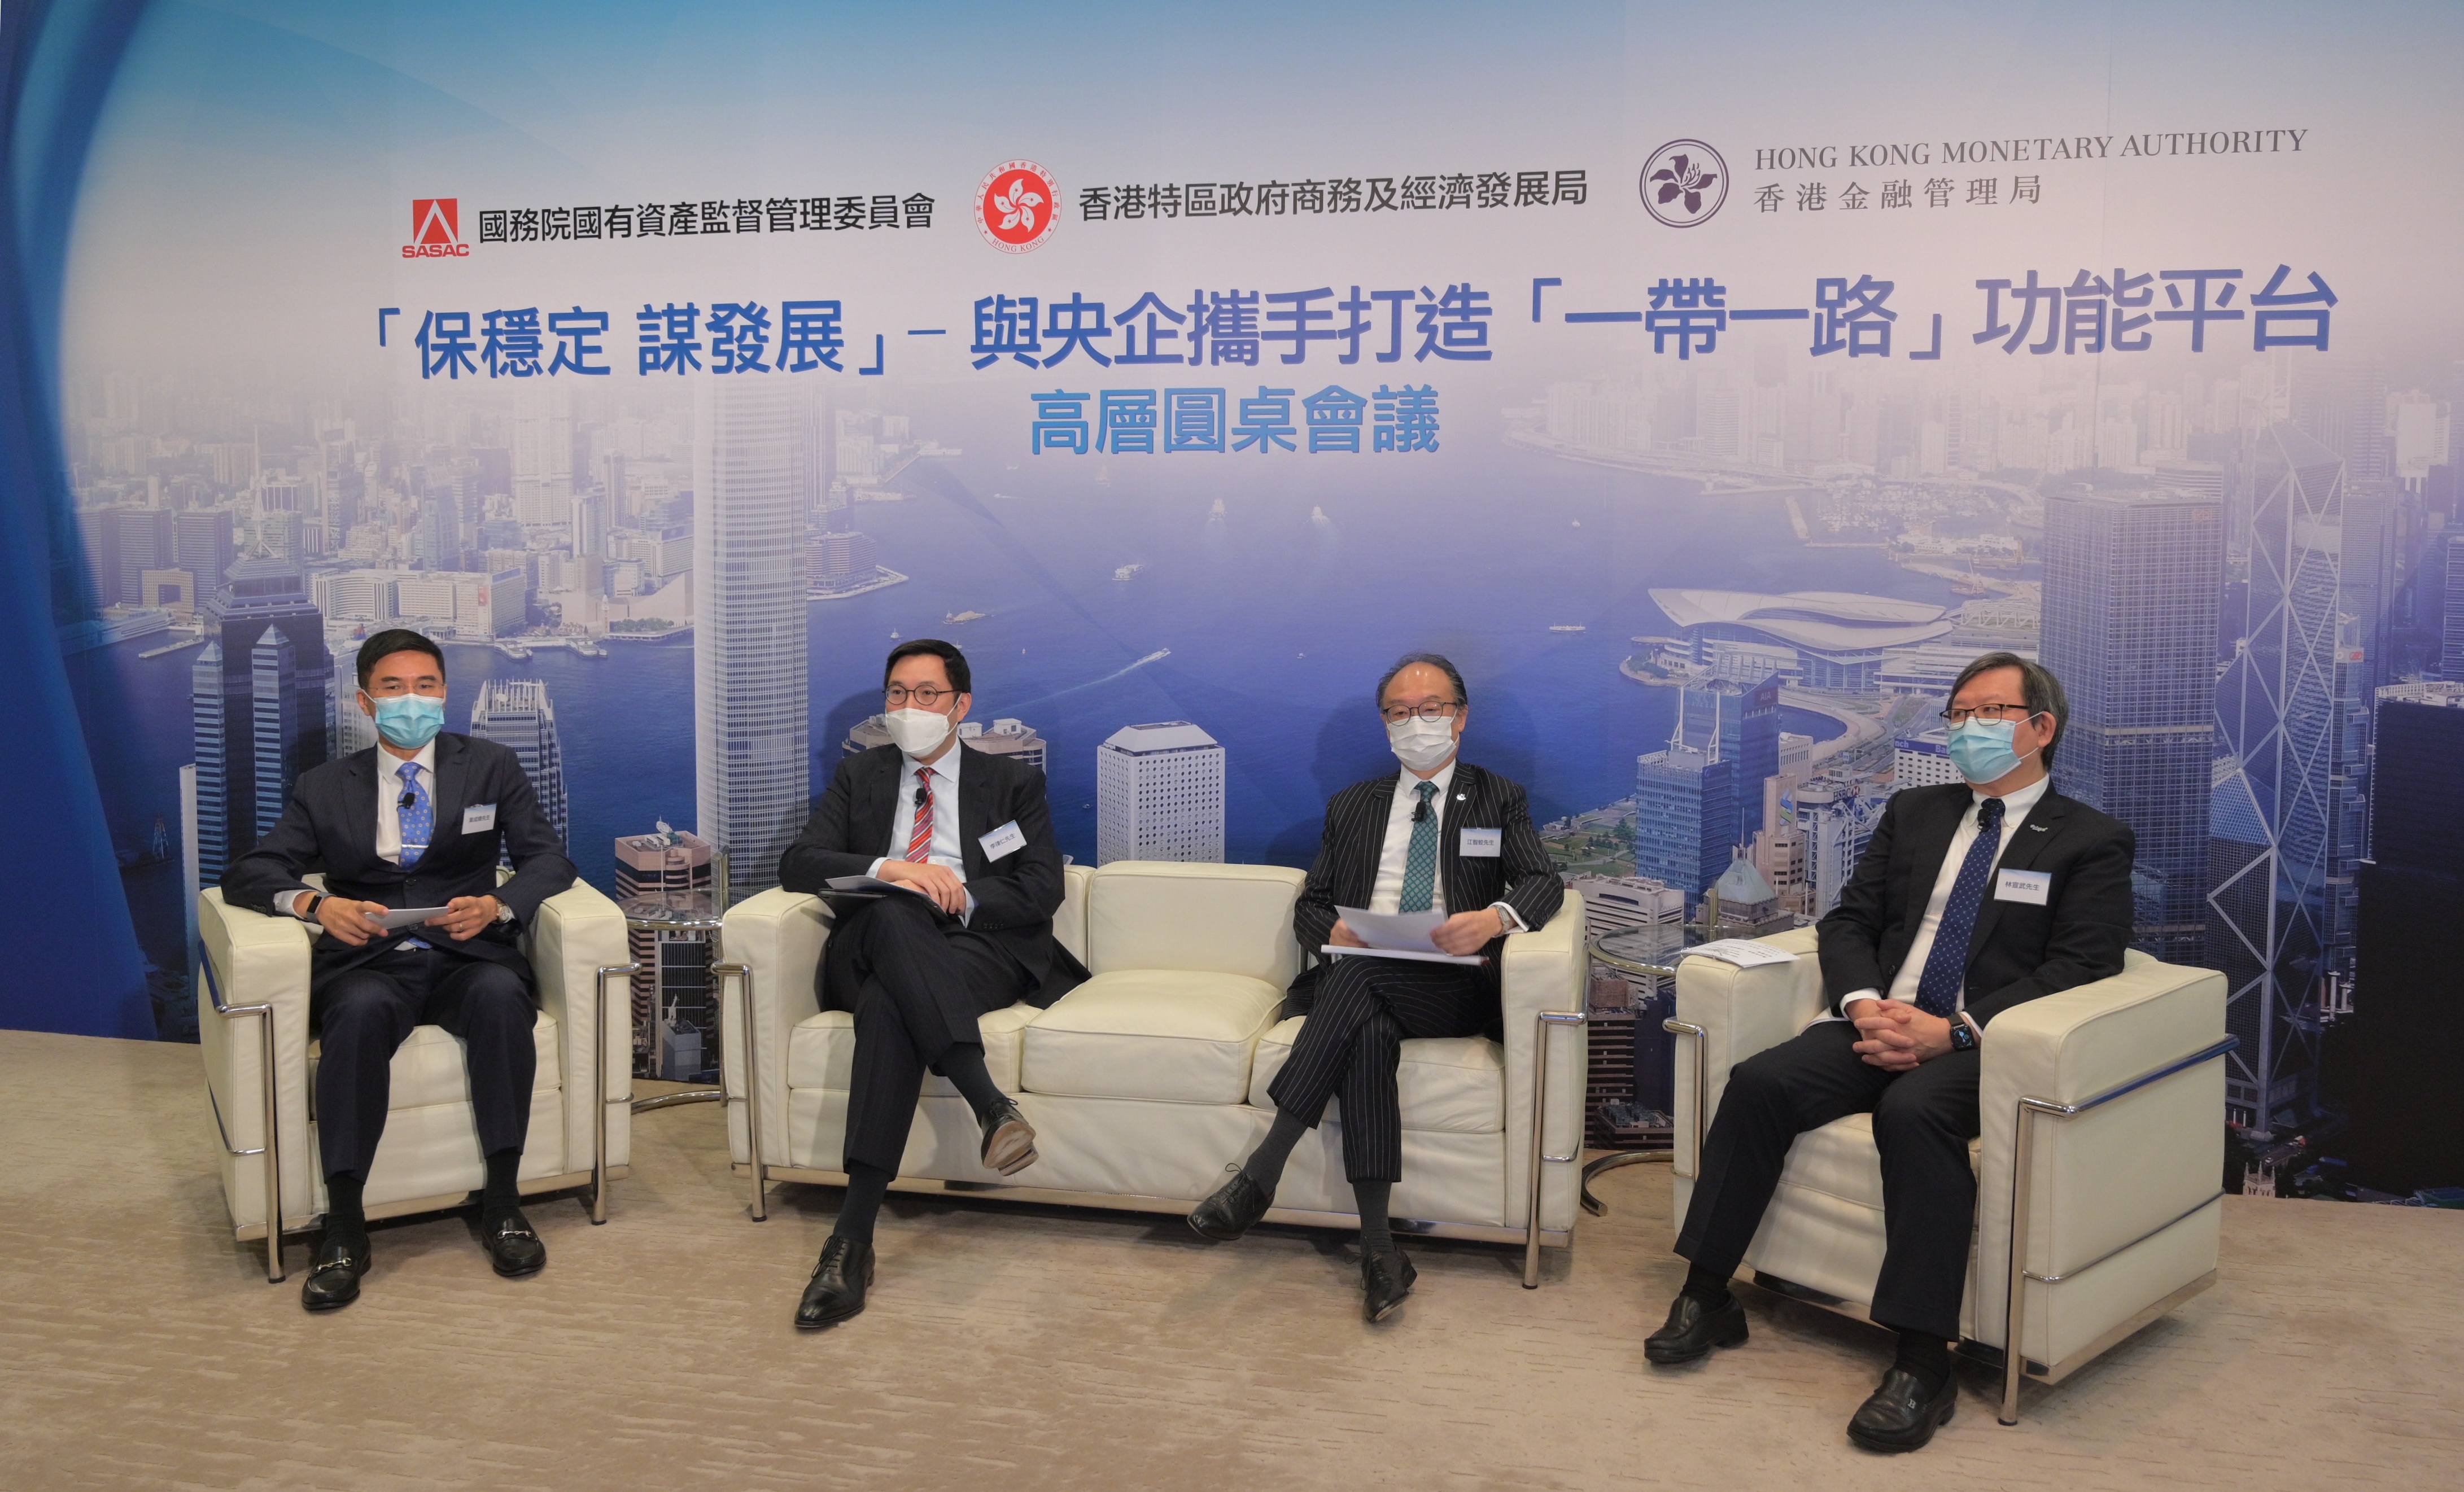 The Commerce and Economic Development Bureau, together with the State-owned Assets Supervision and Administration Commission of the State Council, launched the Mainland Enterprises Partnership Exchange and Interface Programme on 14 May 2021.